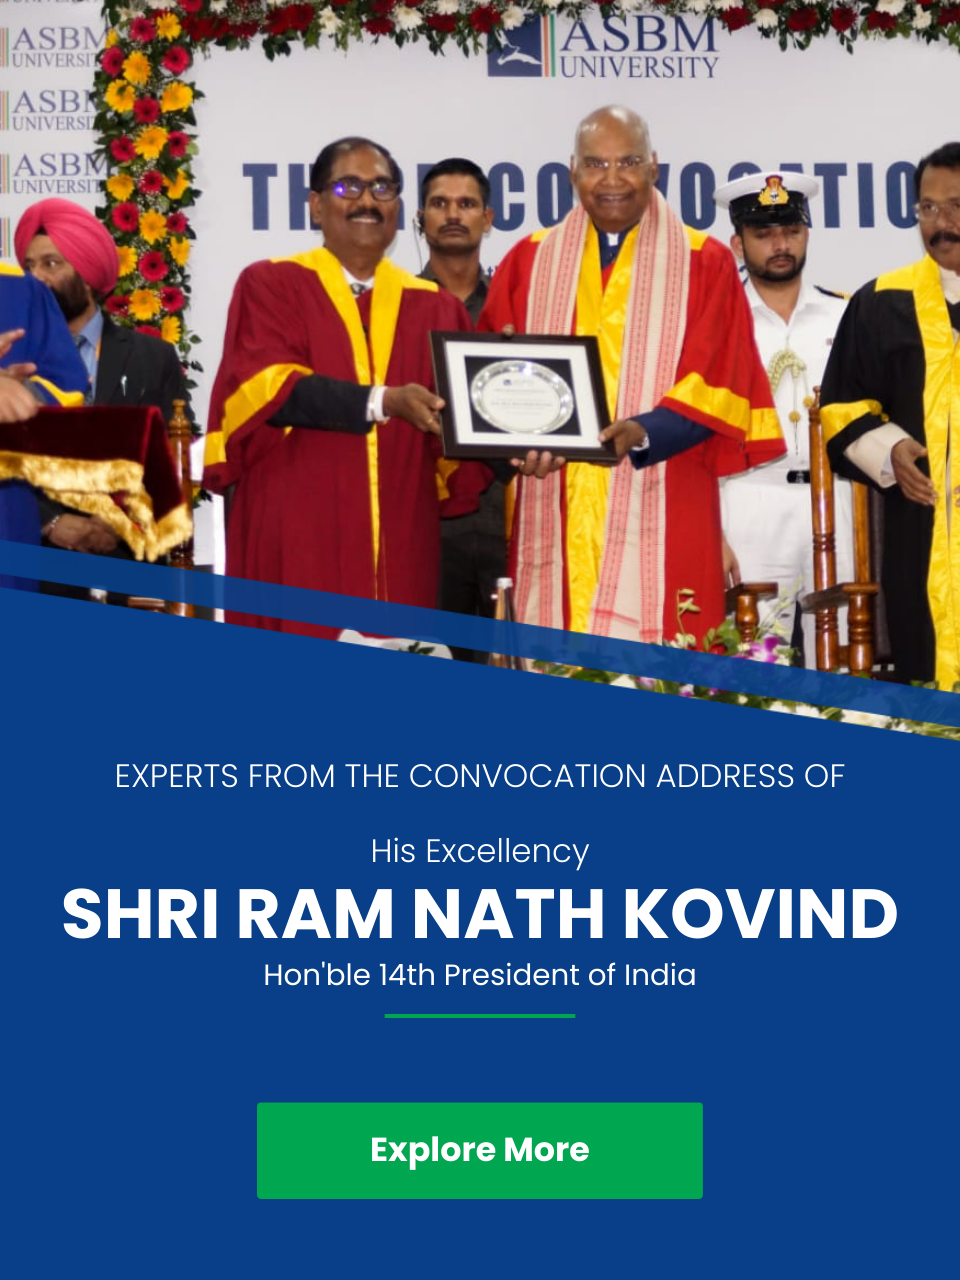 Experts from His Excellency Shri Ram Nath Kovind